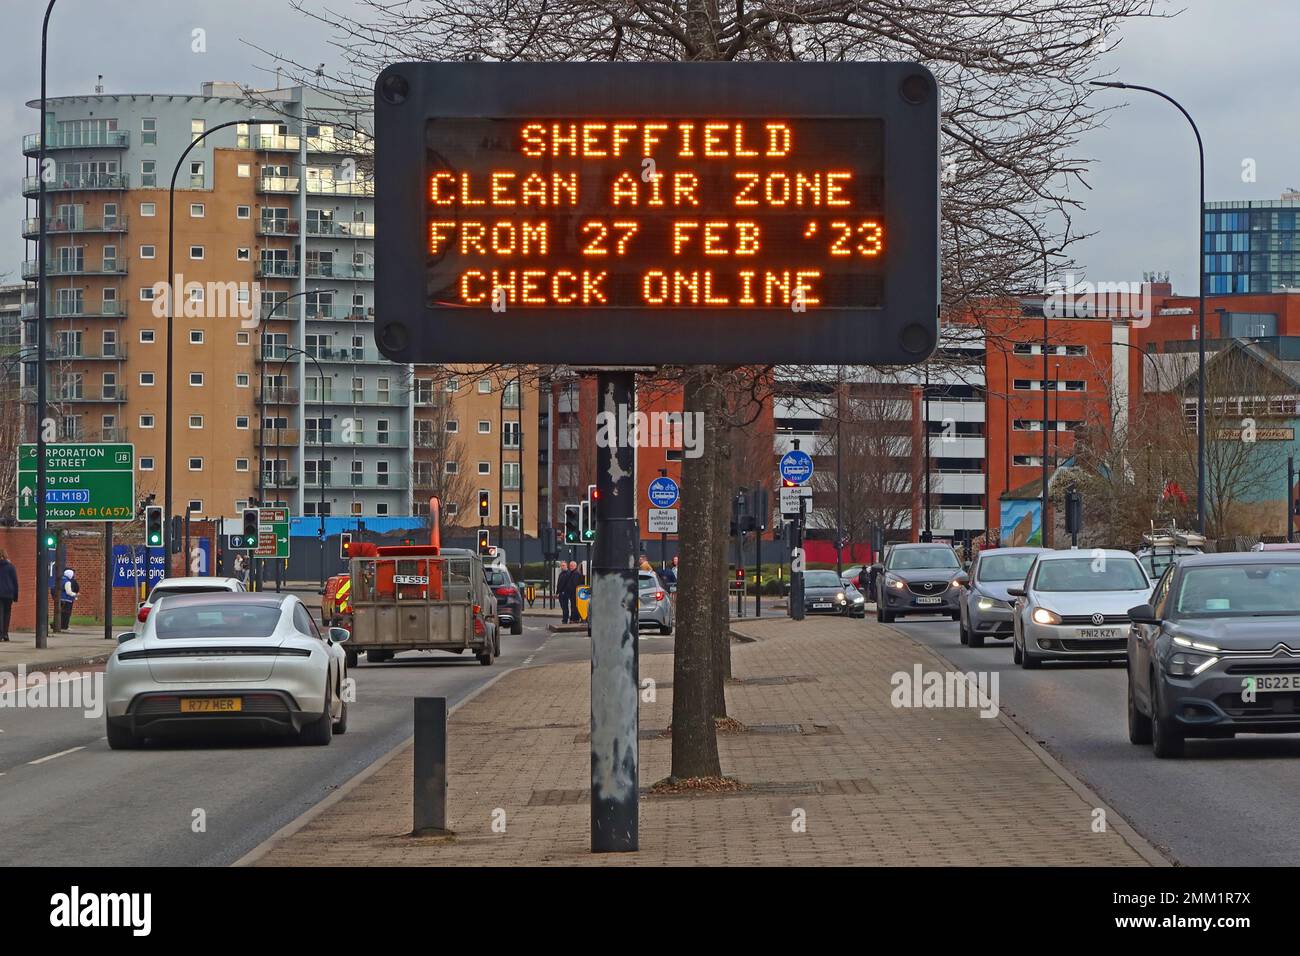 Sheffield Clean Air Zone, from 27 Feb 2023 - Clean Air Zones Stink digital sign - drivers advised to check details online Stock Photo